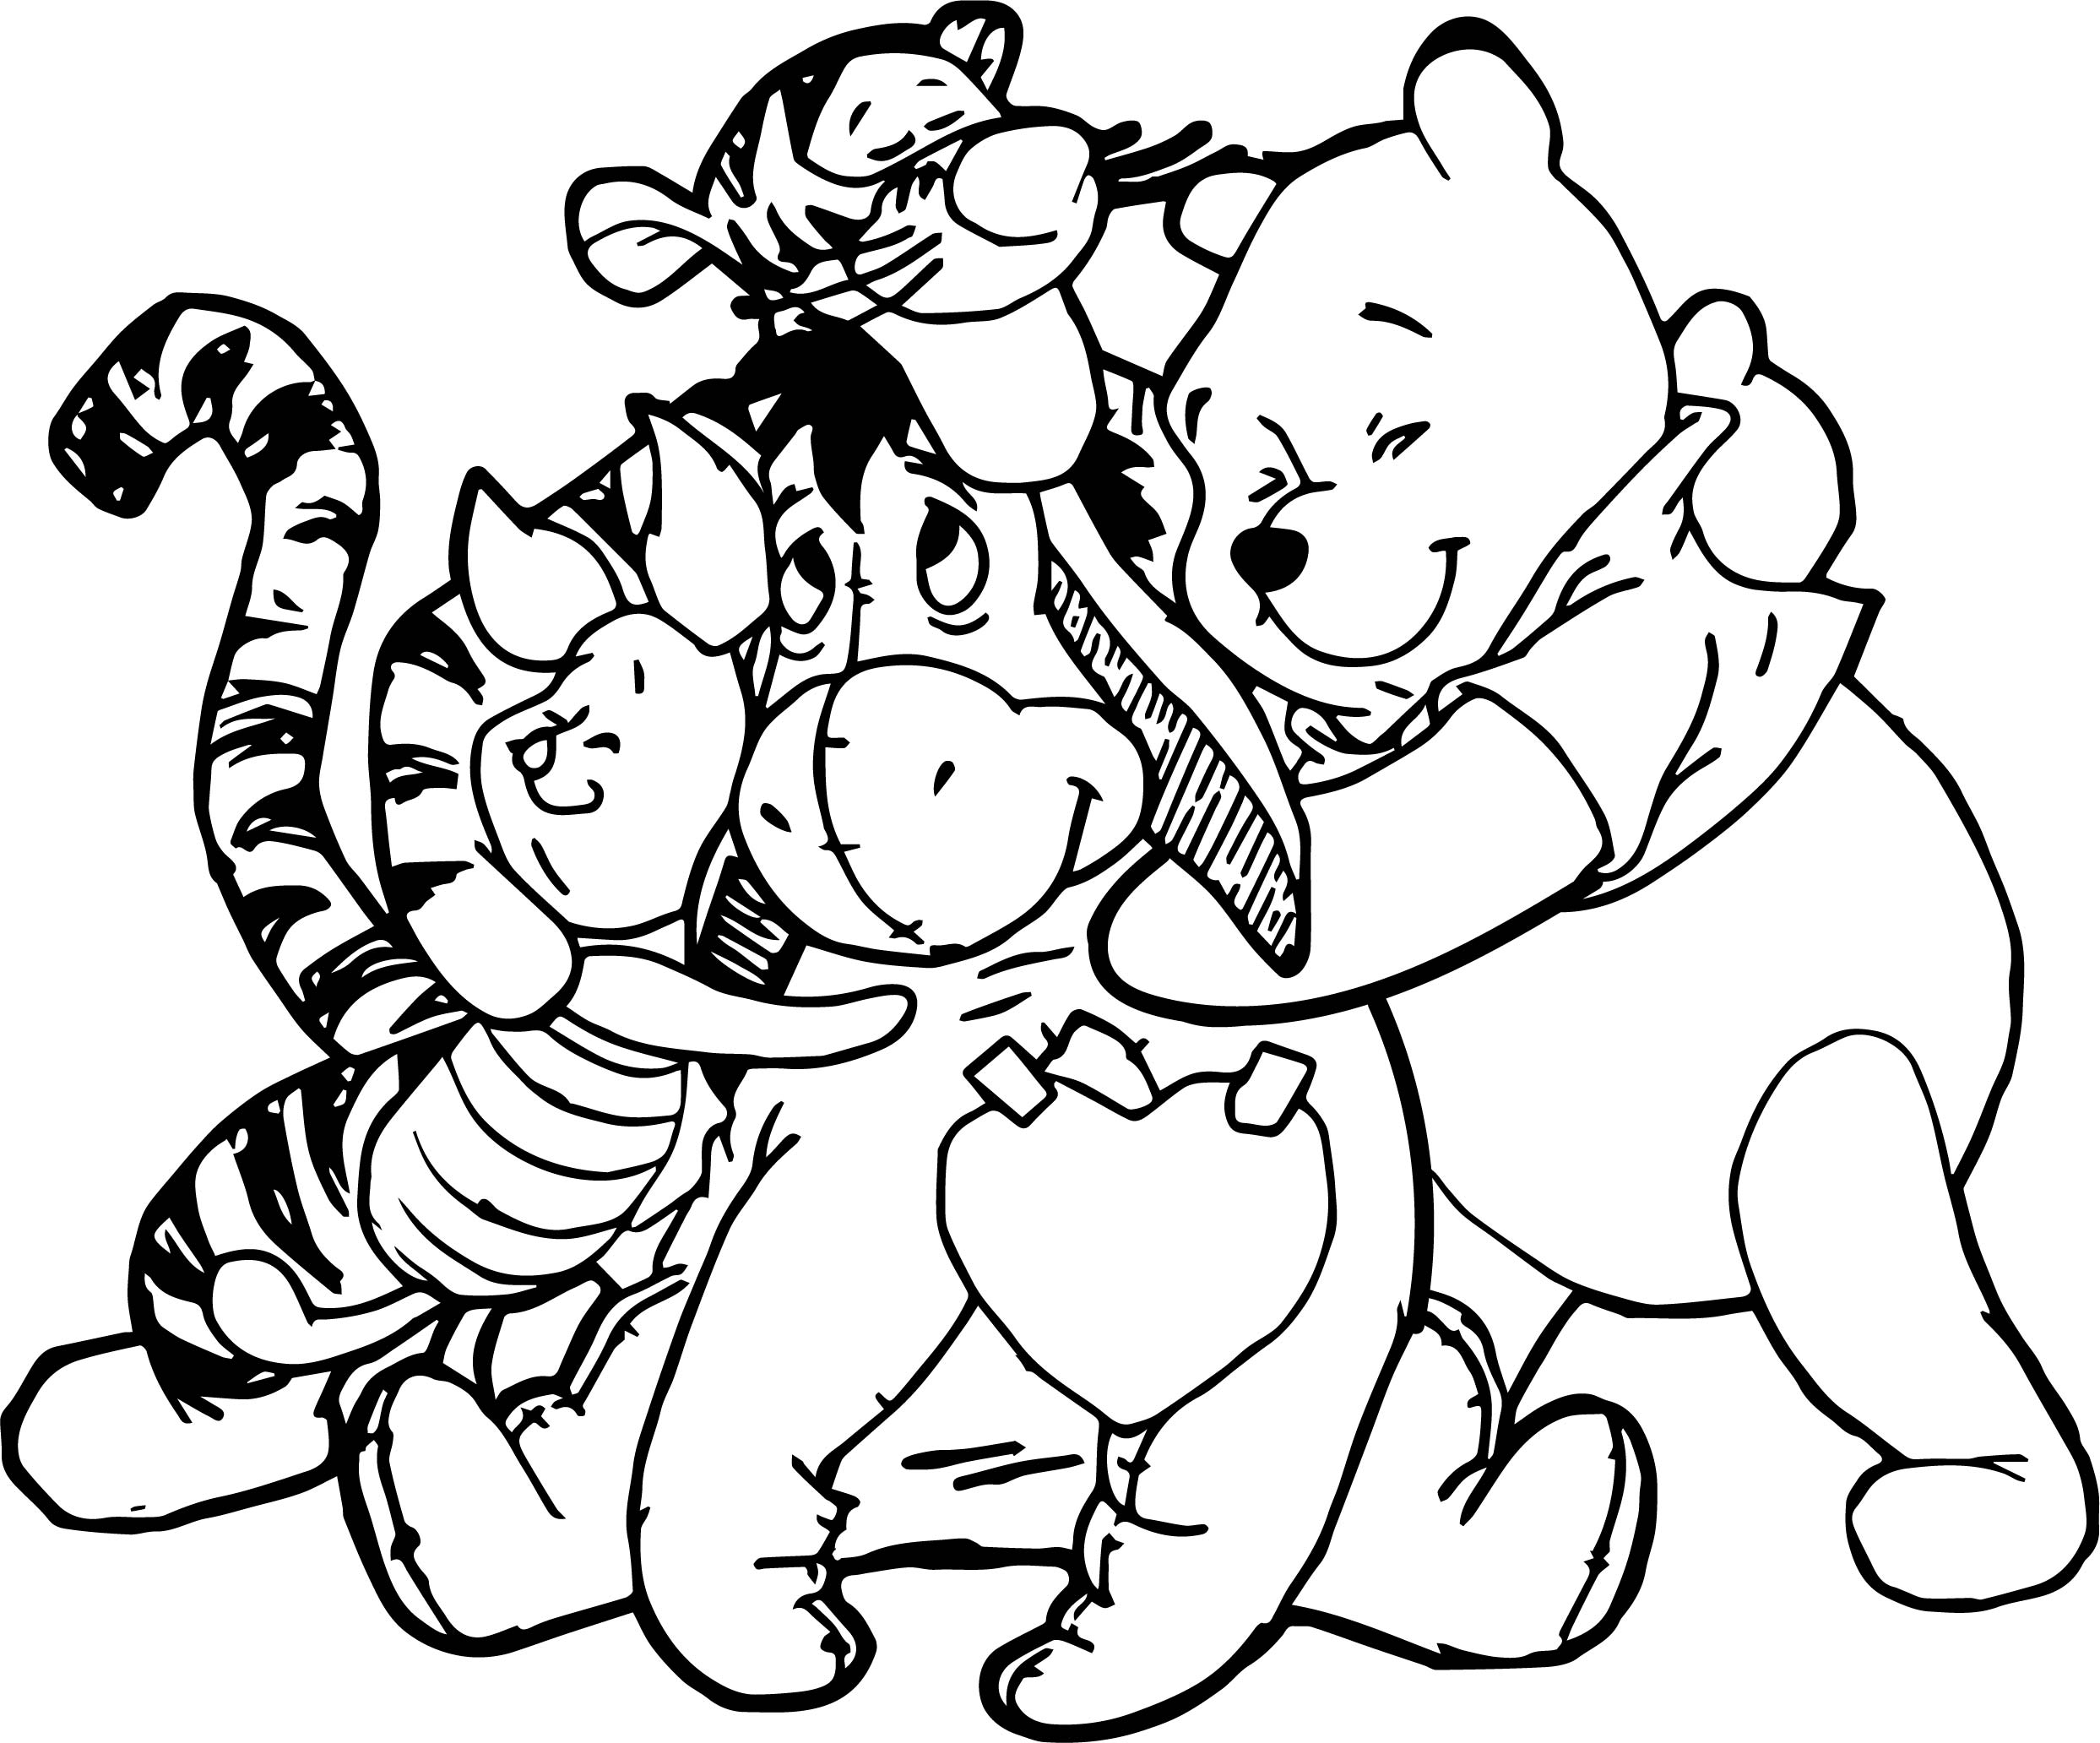  Pooh Bear And Friend Coloring Pages Printable 9